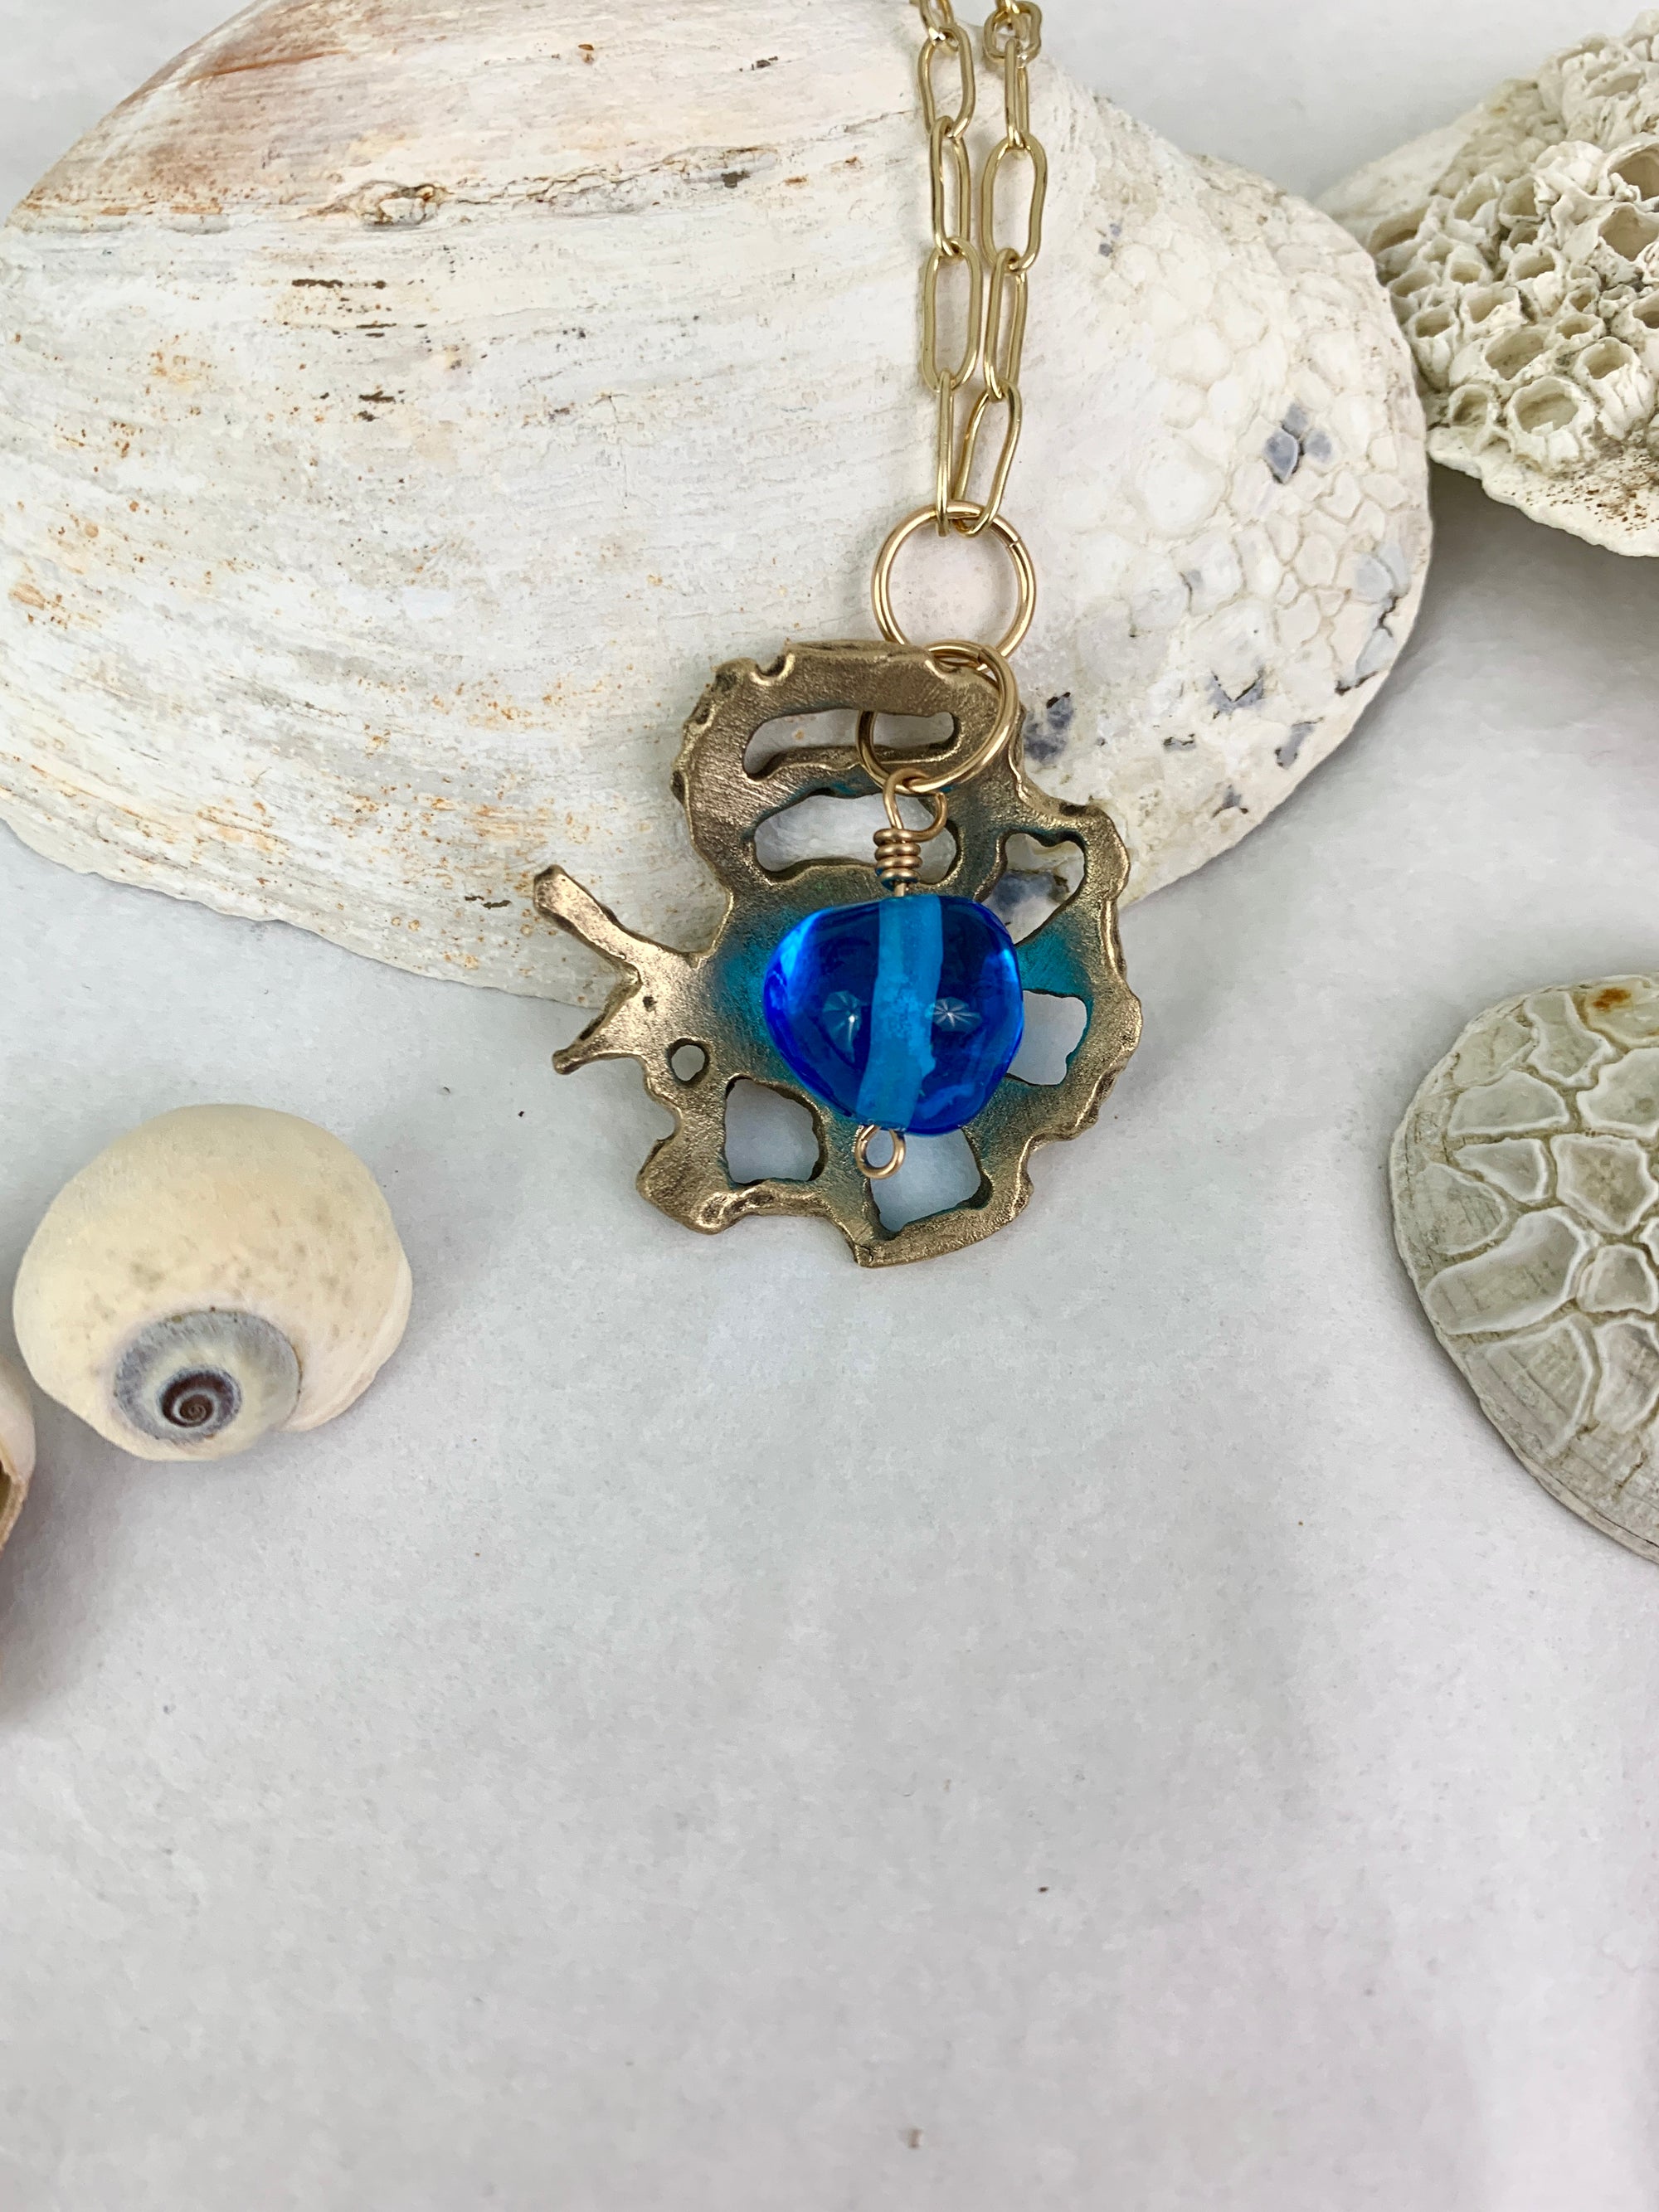 Artisan made ocean inspired necklace with shells